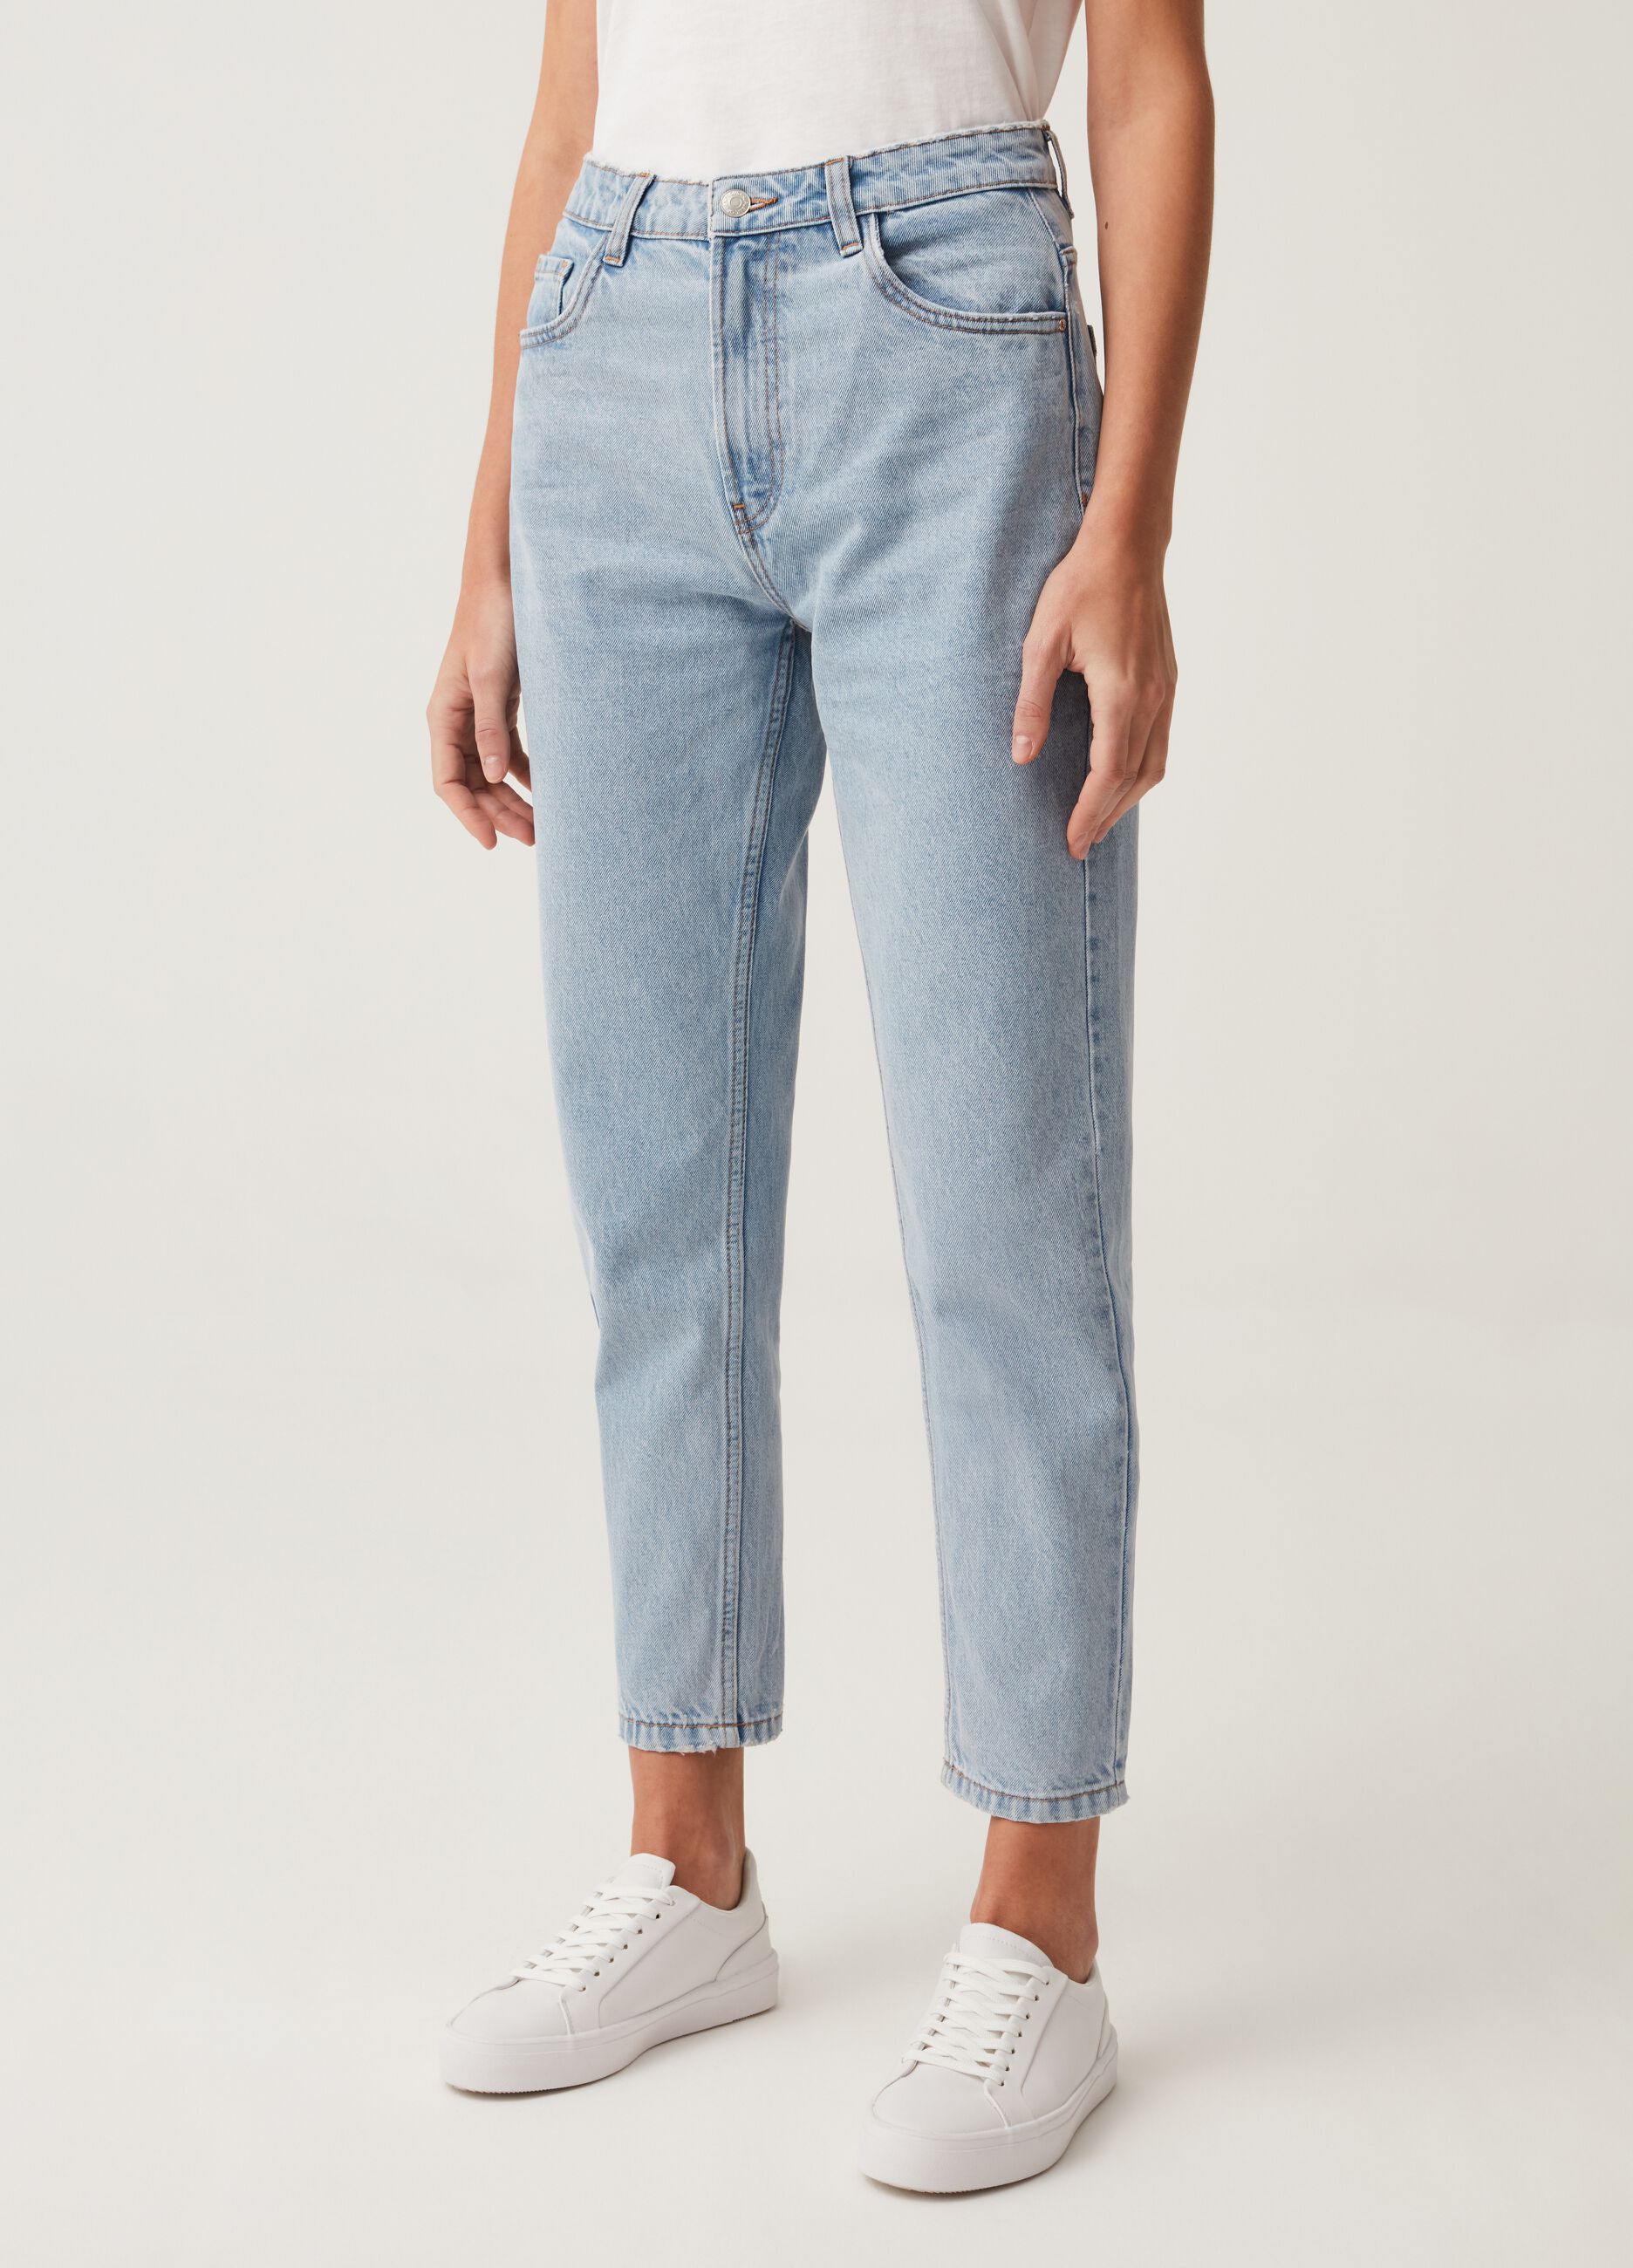 Mum-fit jeans with five pockets